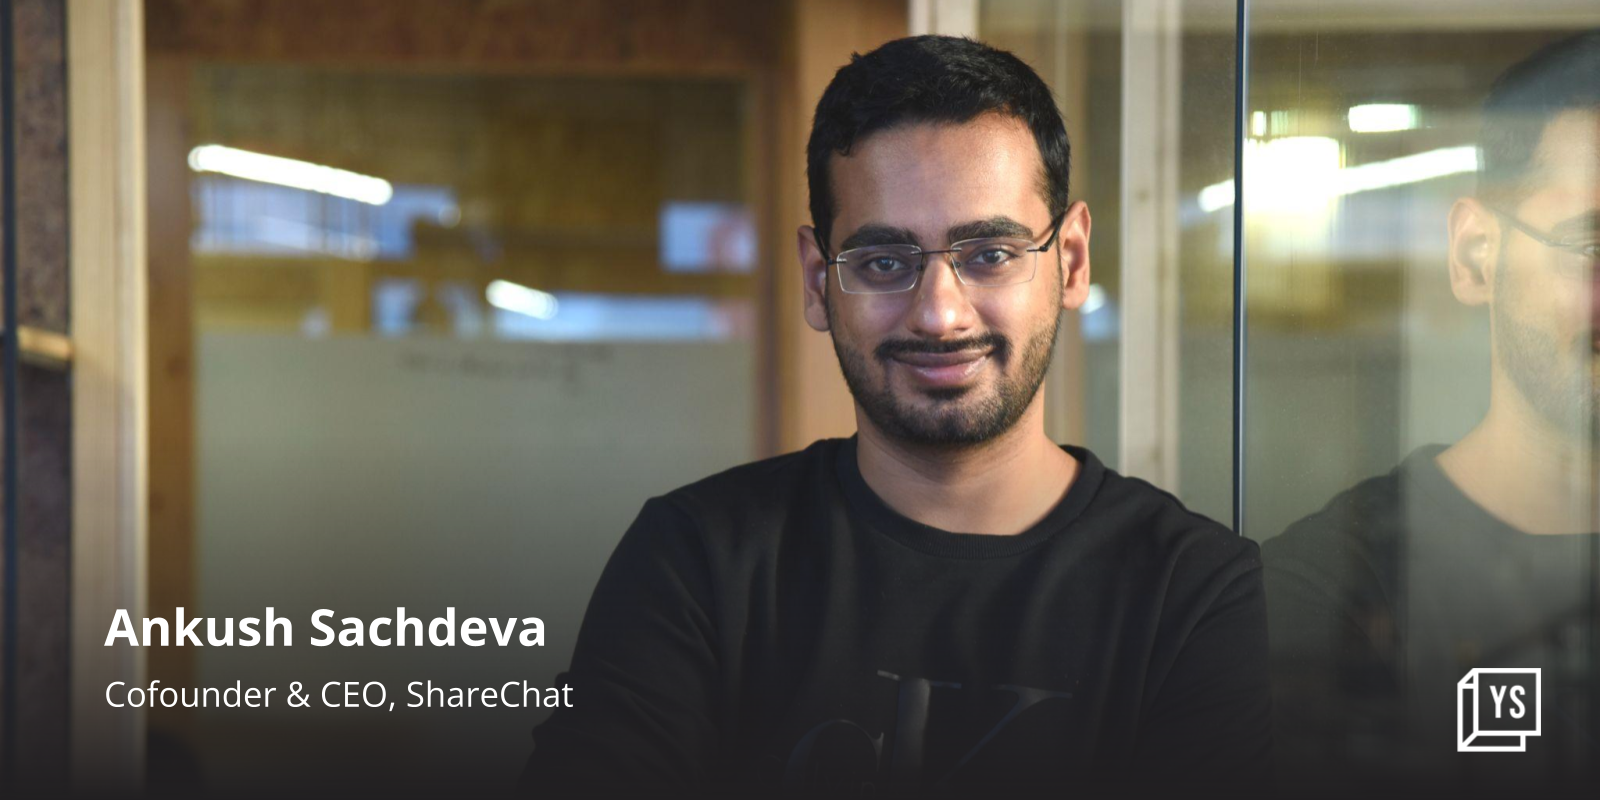 ShareChat aims to be cash flow positive in one year

